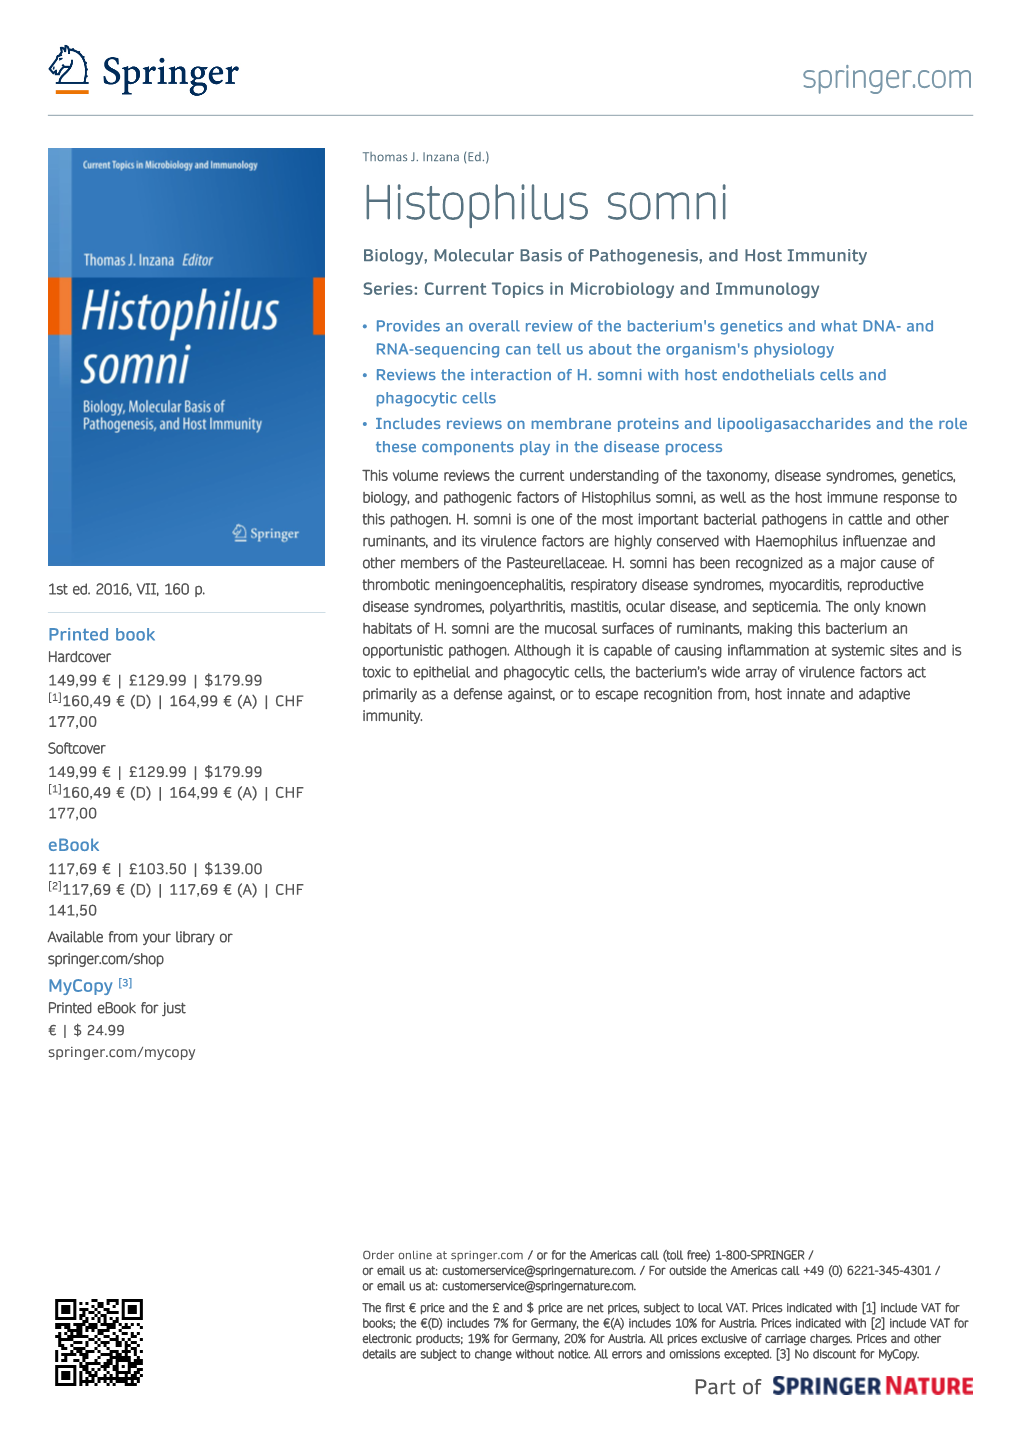 Histophilus Somni Biology, Molecular Basis of Pathogenesis, and Host Immunity Series: Current Topics in Microbiology and Immunology